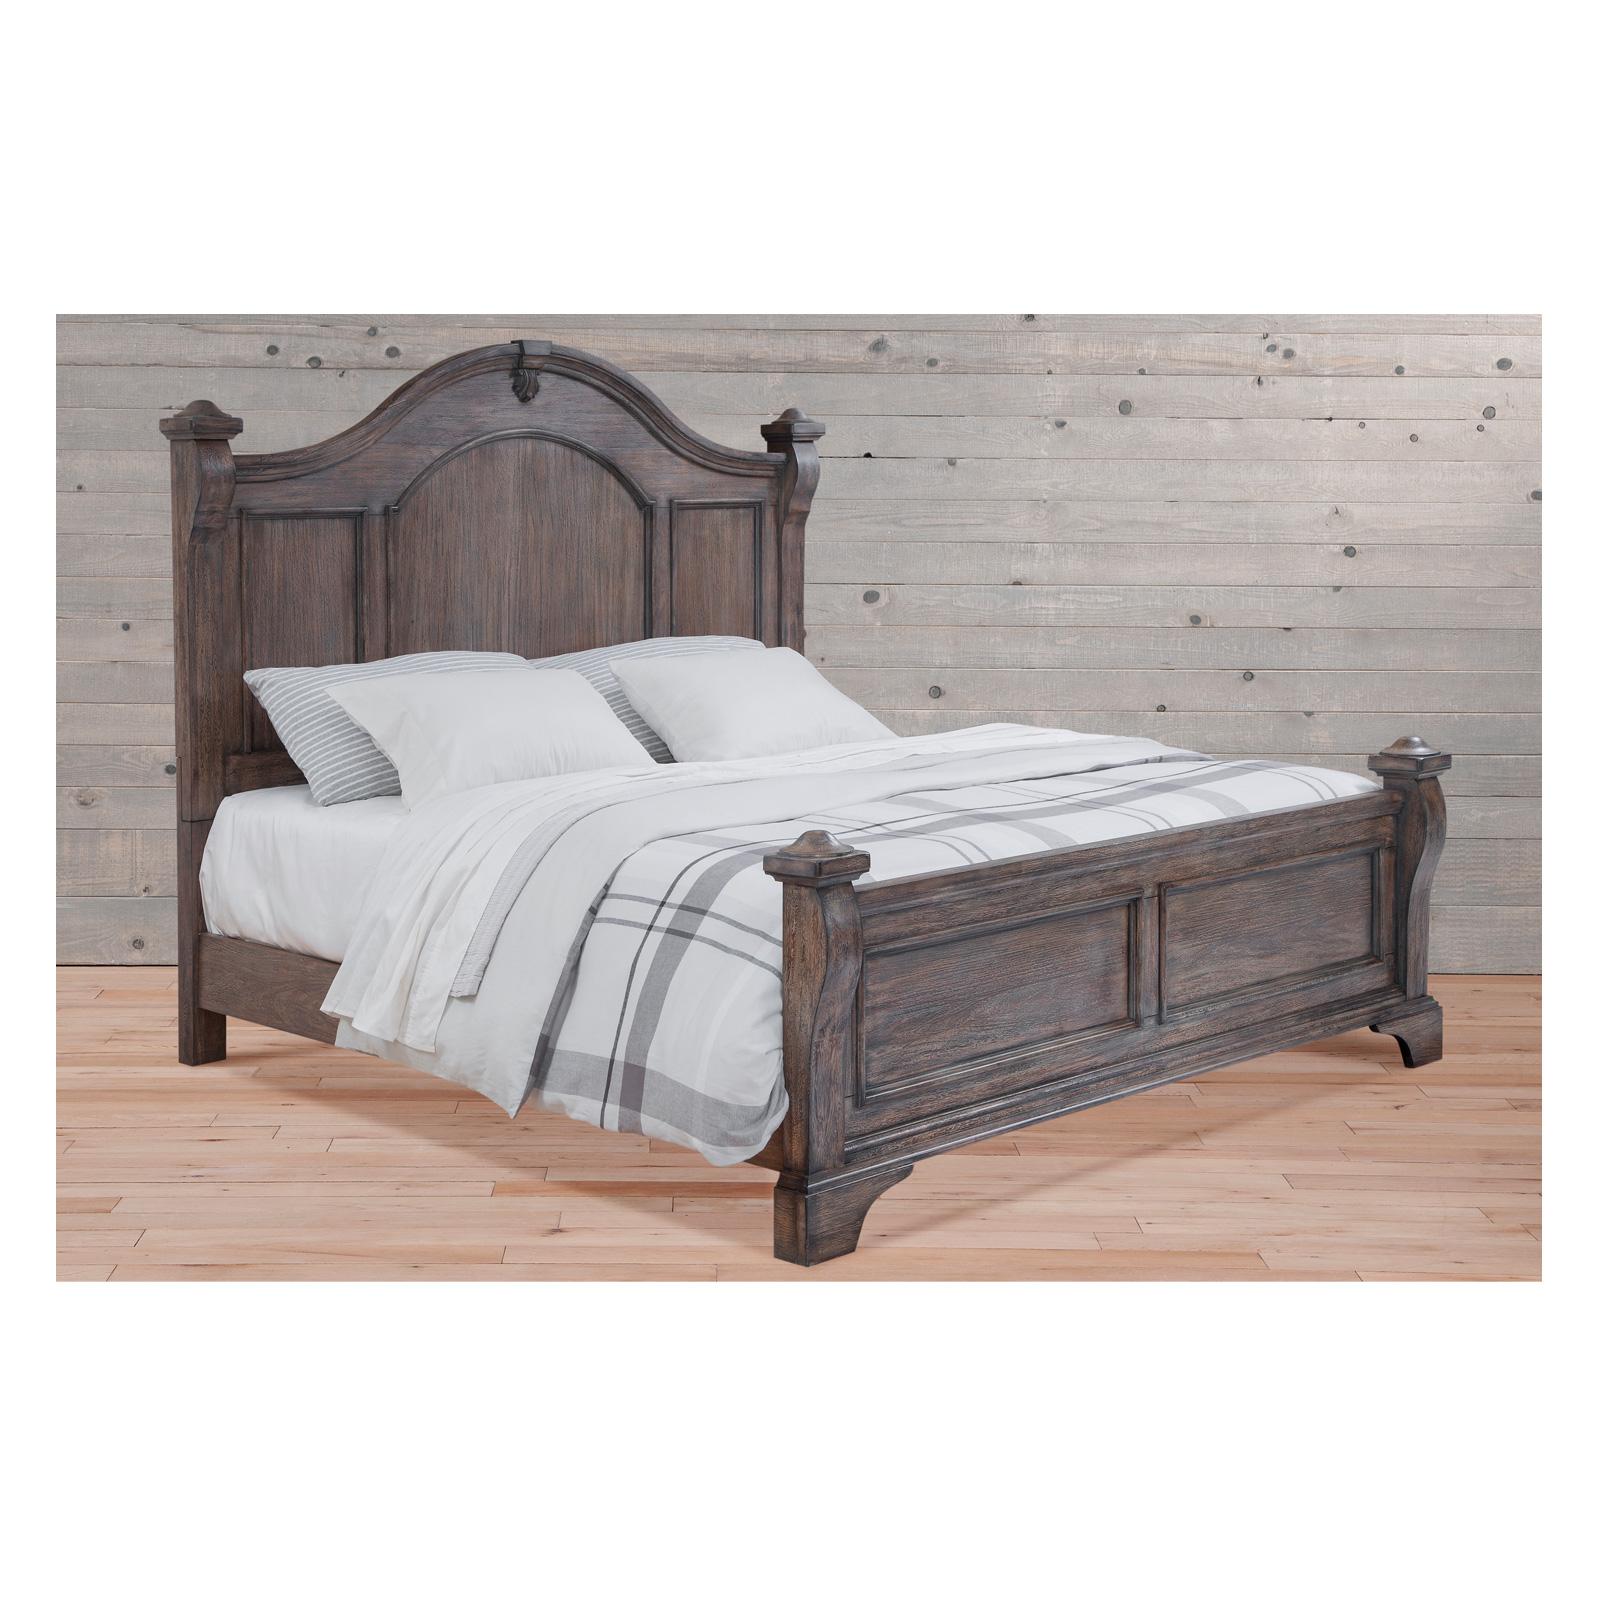 Classic, Traditional, Cottage Poster Bed HEIRLOOM 2975-50POS 2975-50POPO in Charcoal 